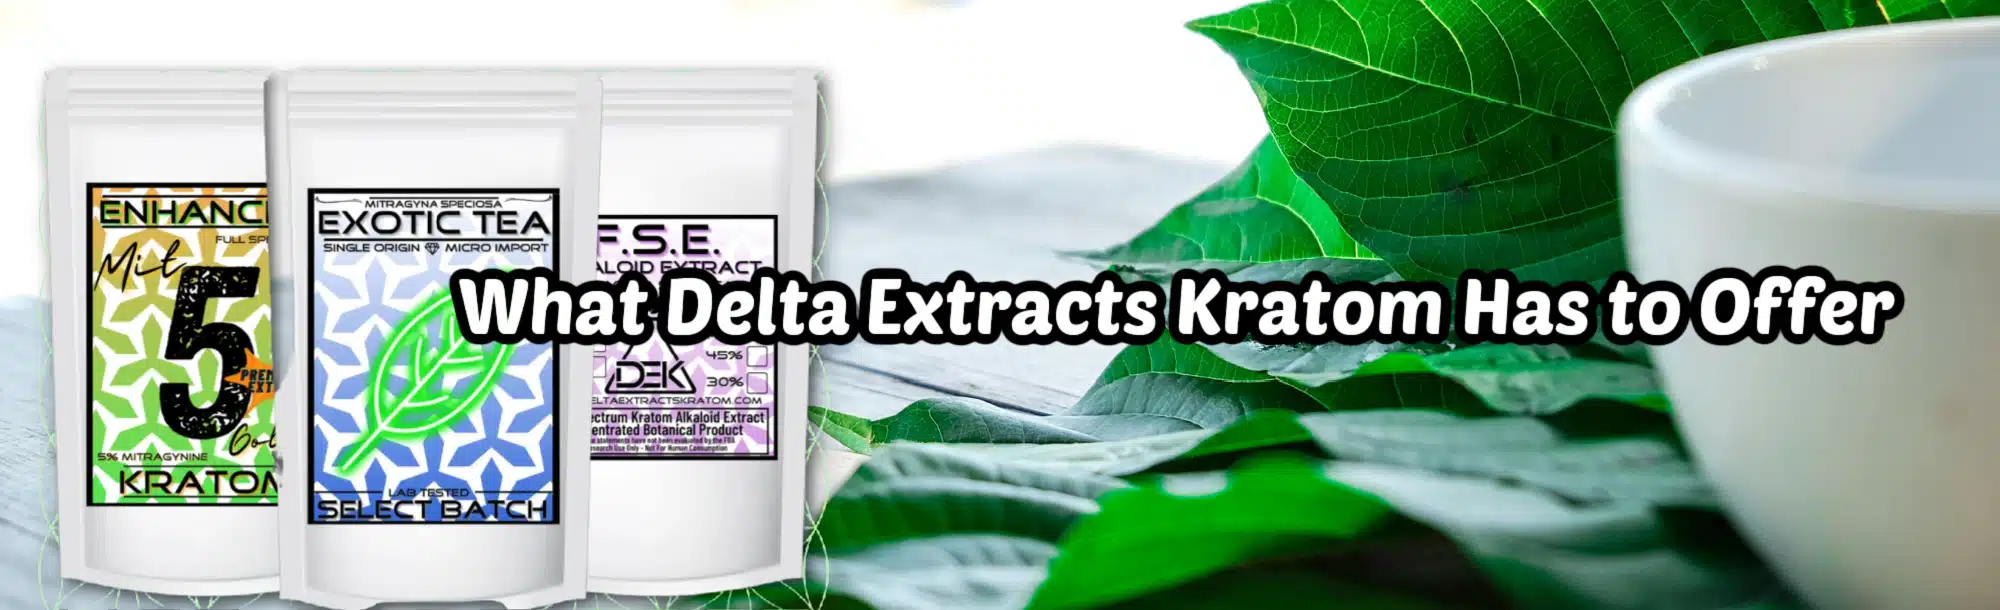 what delta extract kratom has to offer with sample products in background